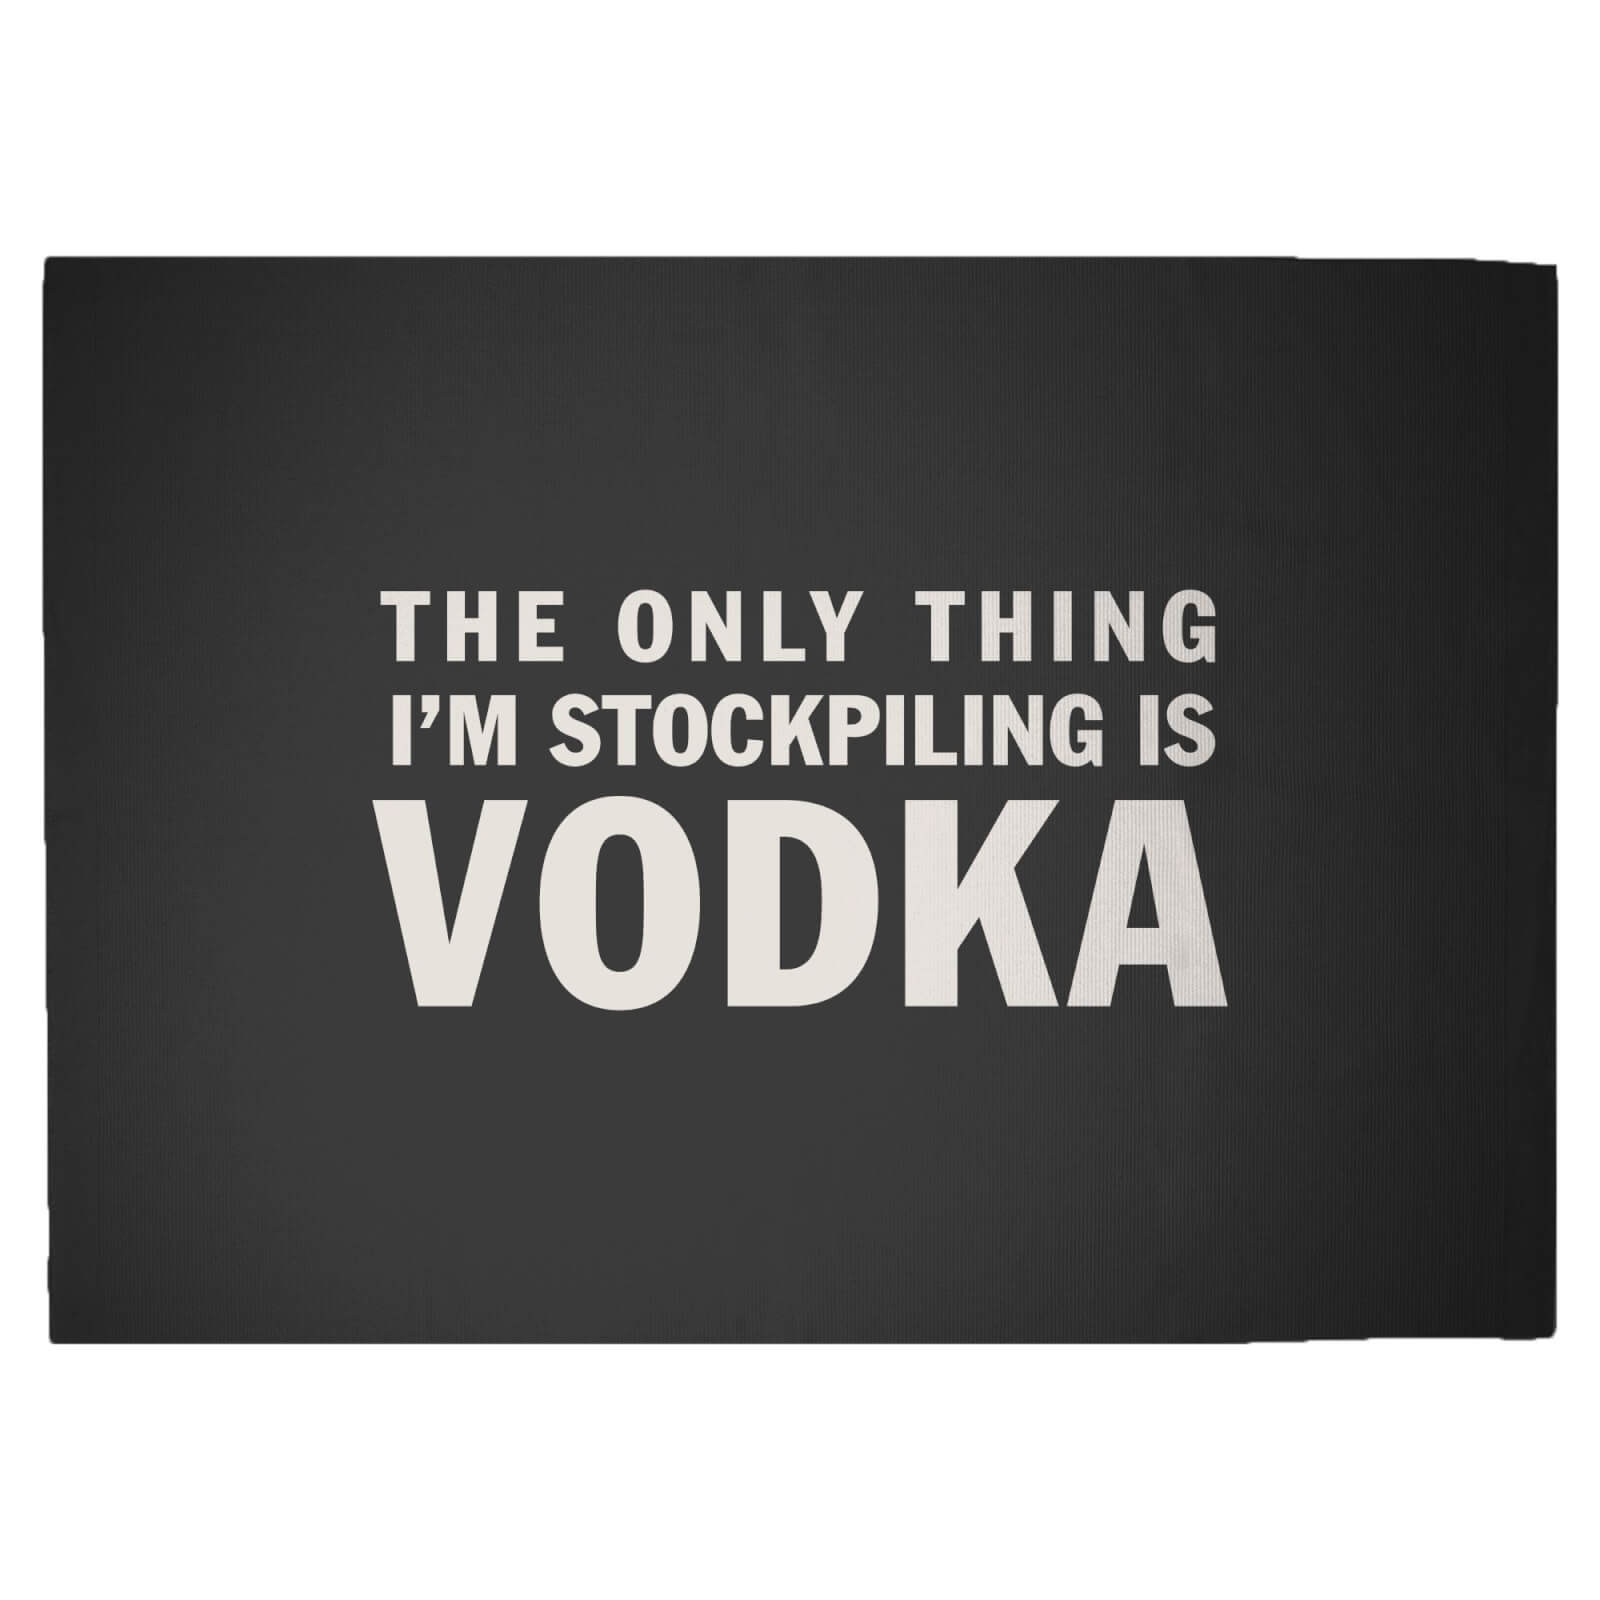 The Only Thing I'm Stockpiling Is Vodka Woven Rug - Large